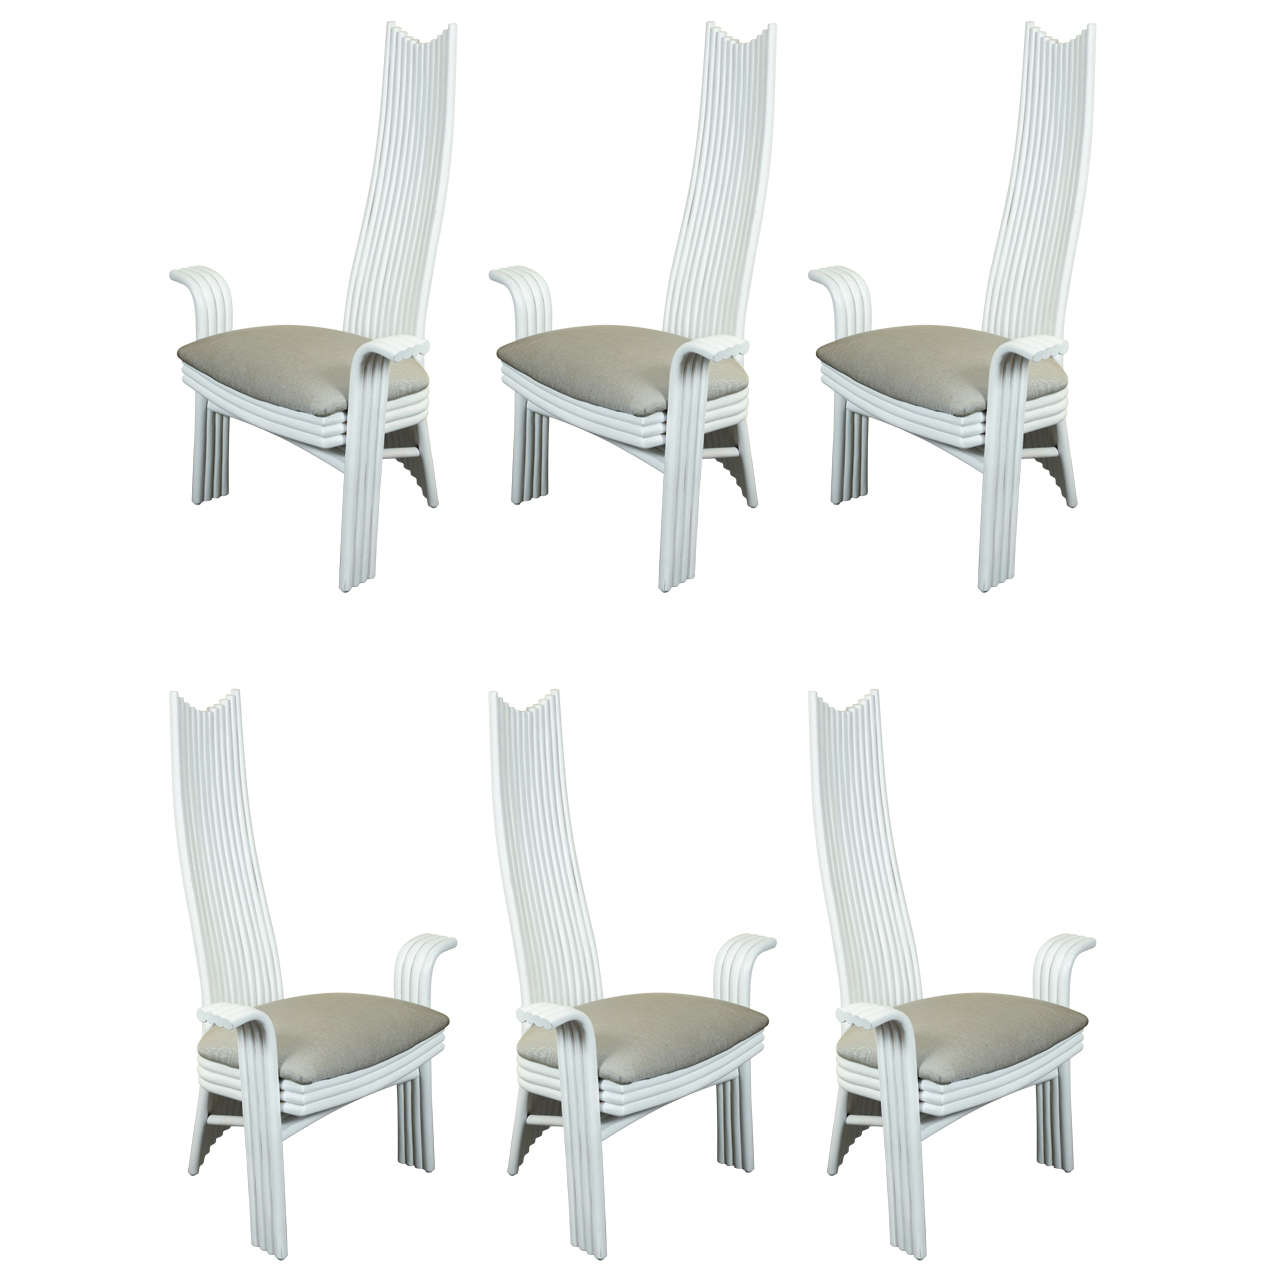 Six Unusual High-Back Dining Chairs